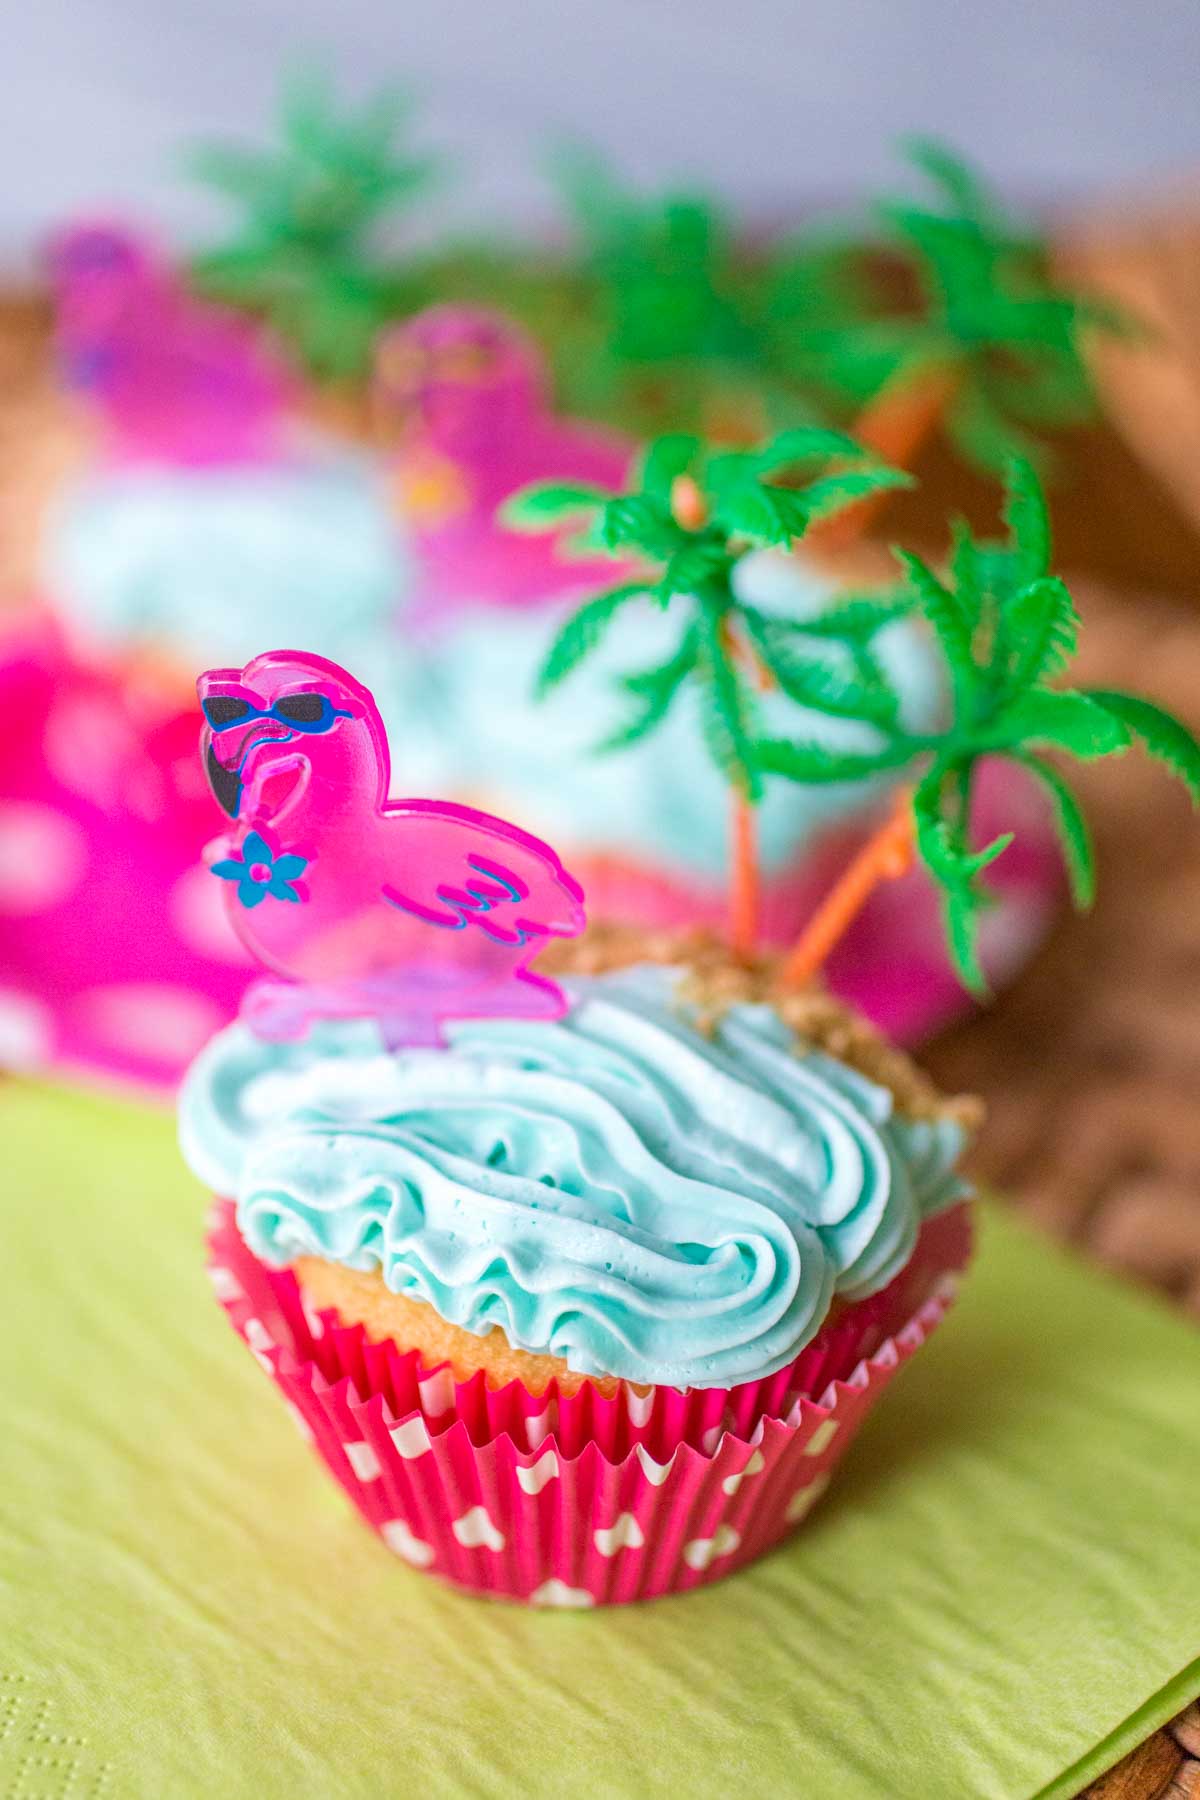 A pink flamingo cupcake with a plastic palm tree topper.